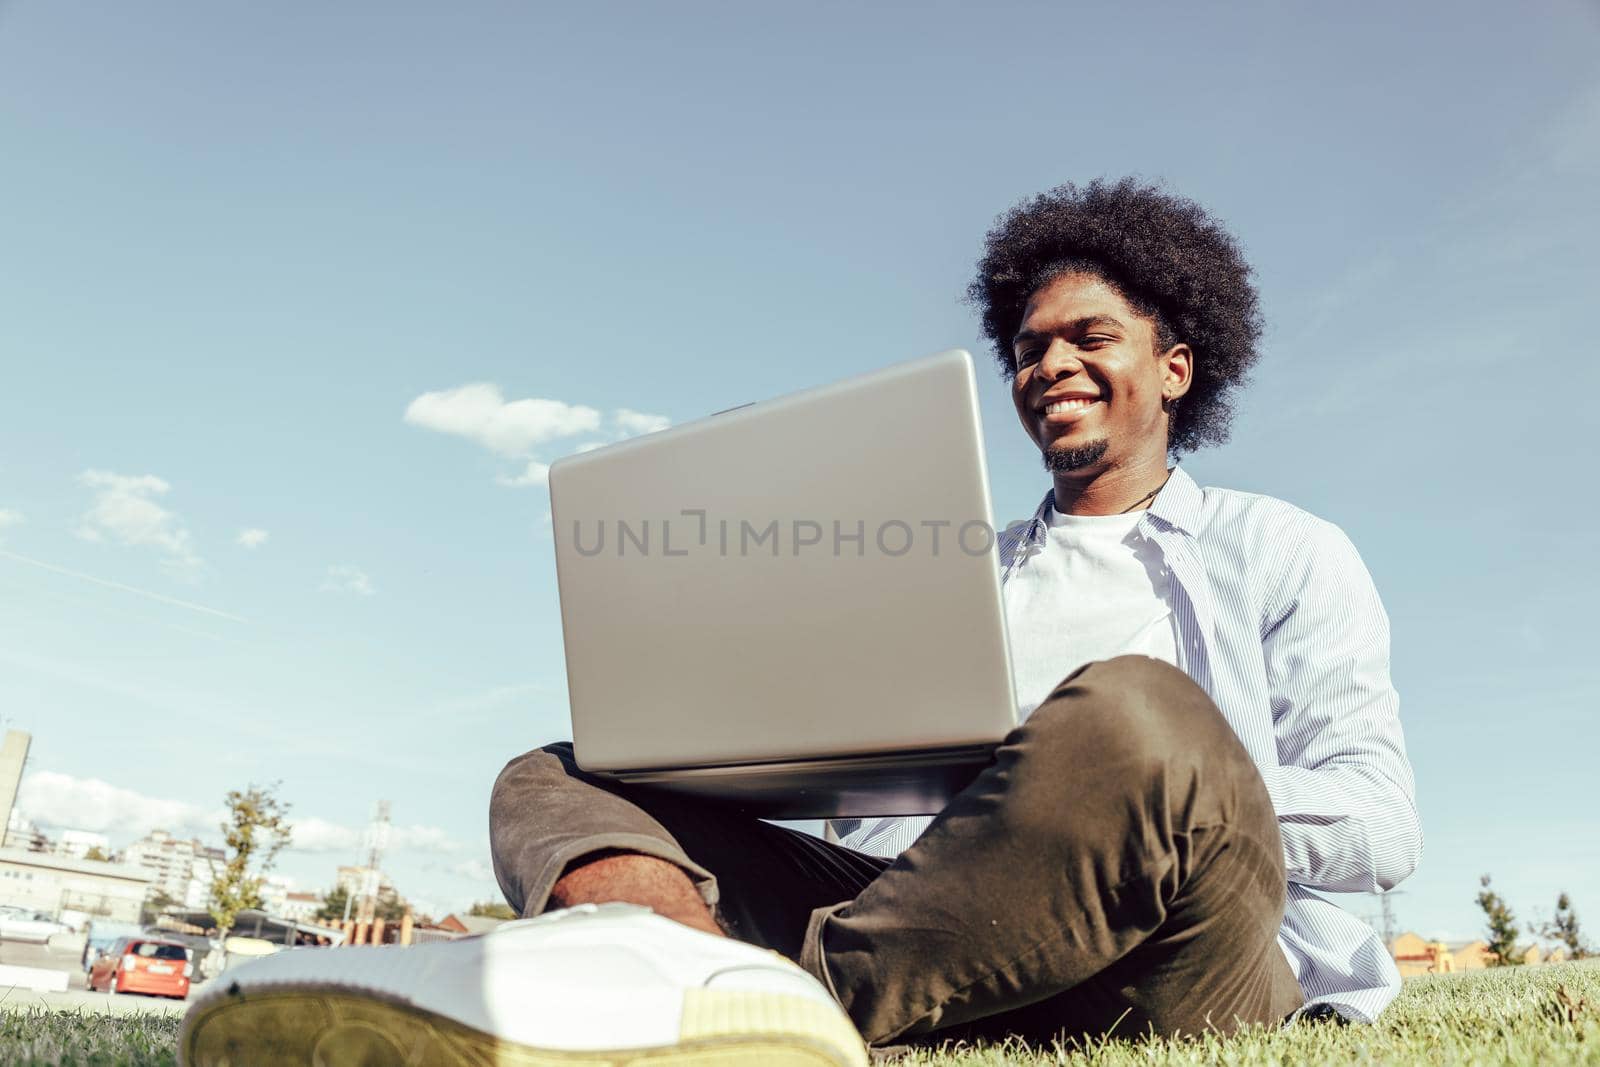 African american young man using laptop in park joyfully by ALVANPH